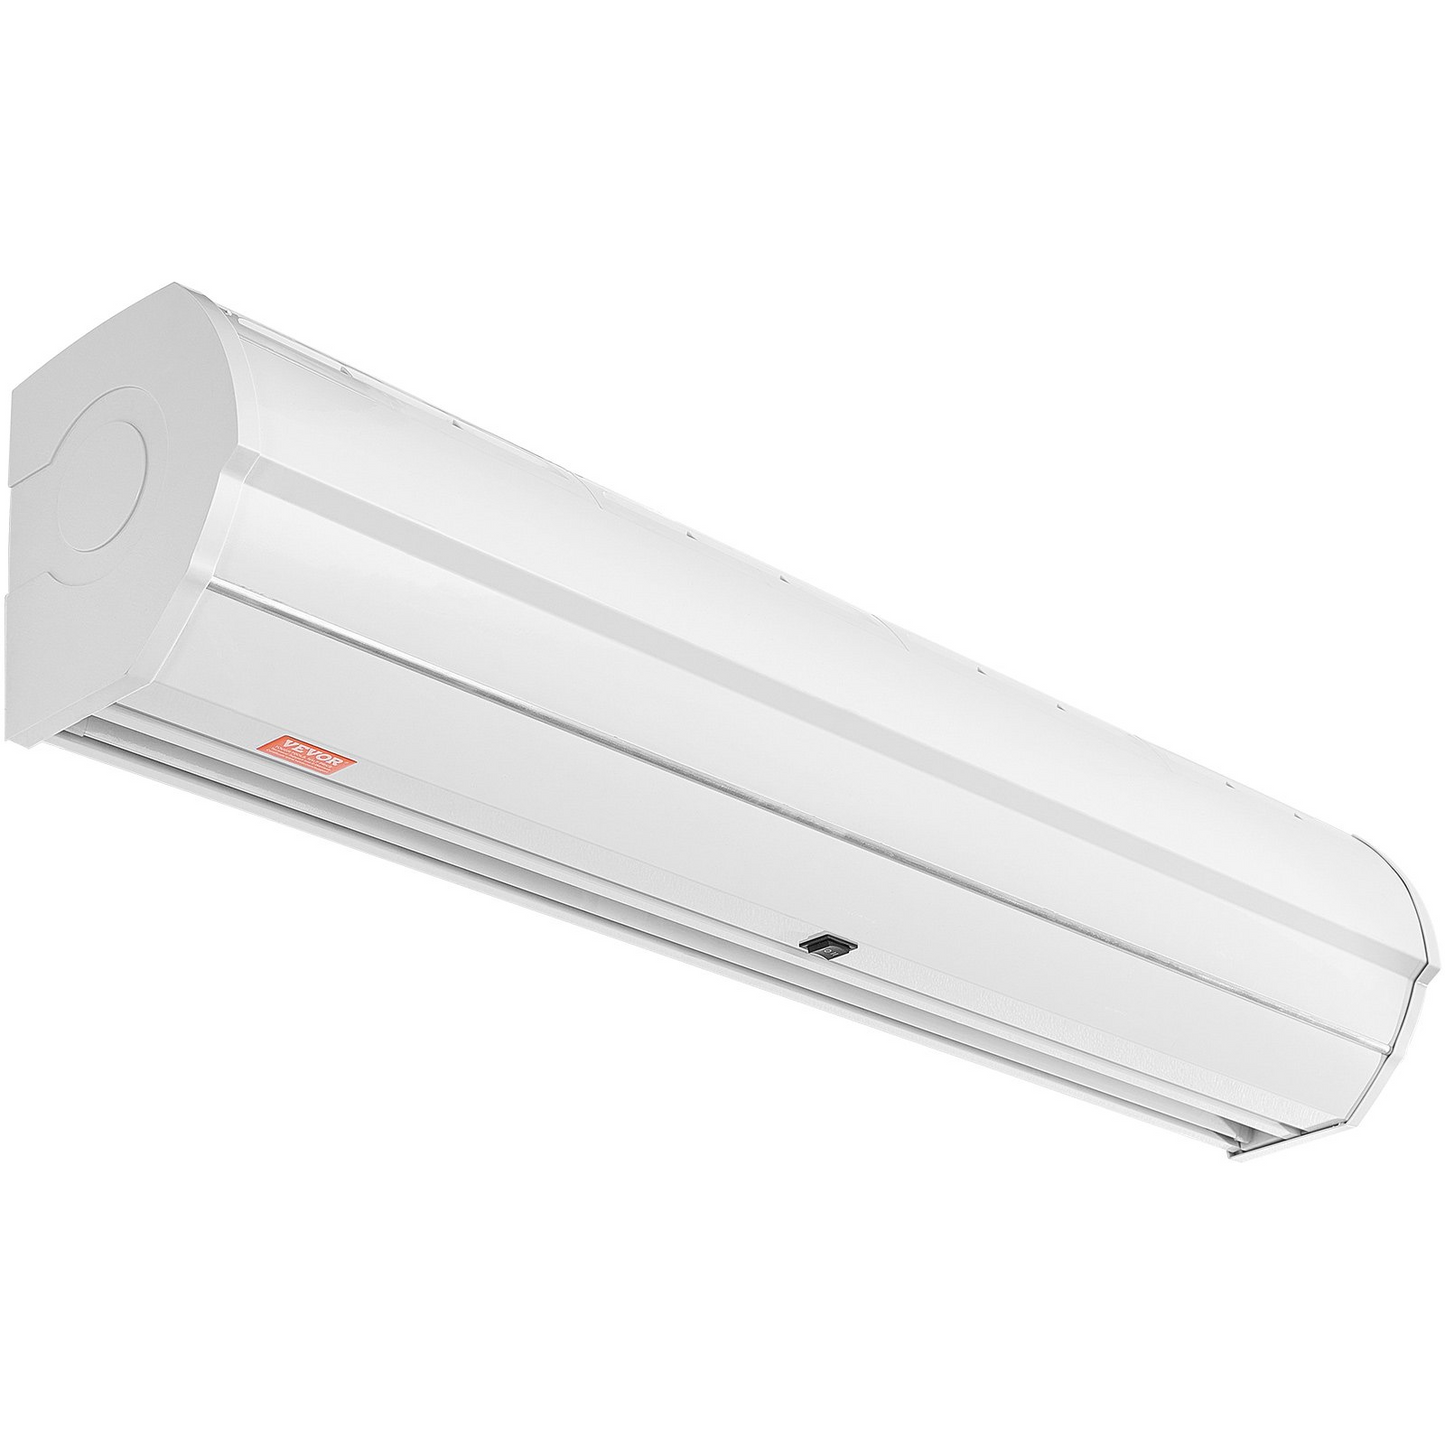 VEVOR 48" Commercial Indoor Air Curtain Super Power 2 Speeds 1200CFM, Wall Mounted Air Curtains for Doors, Indoor Over Door Fan with Heavy Duty Limit Switch, Easy-Install 110V Unheated, Goodies N Stuff